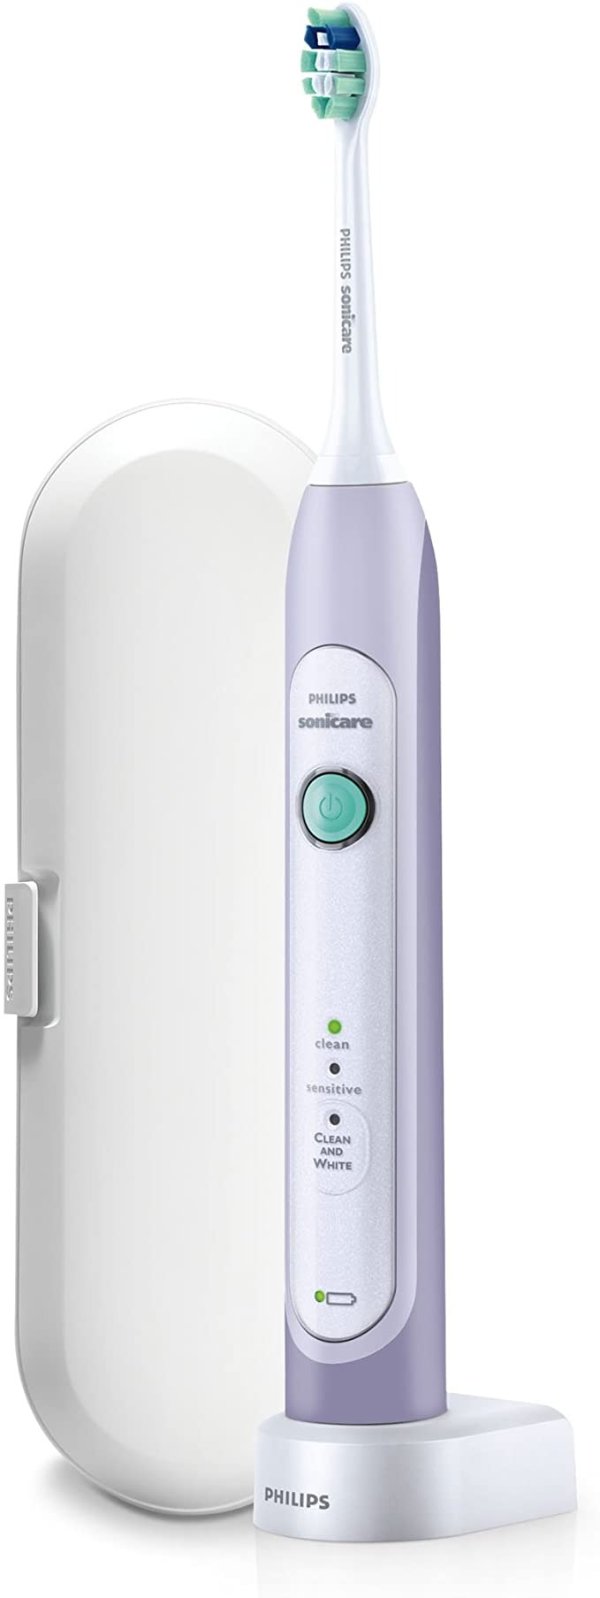 Philips Sonicare, Healthy White Electric Toothbrush, Lavender, 1 Count